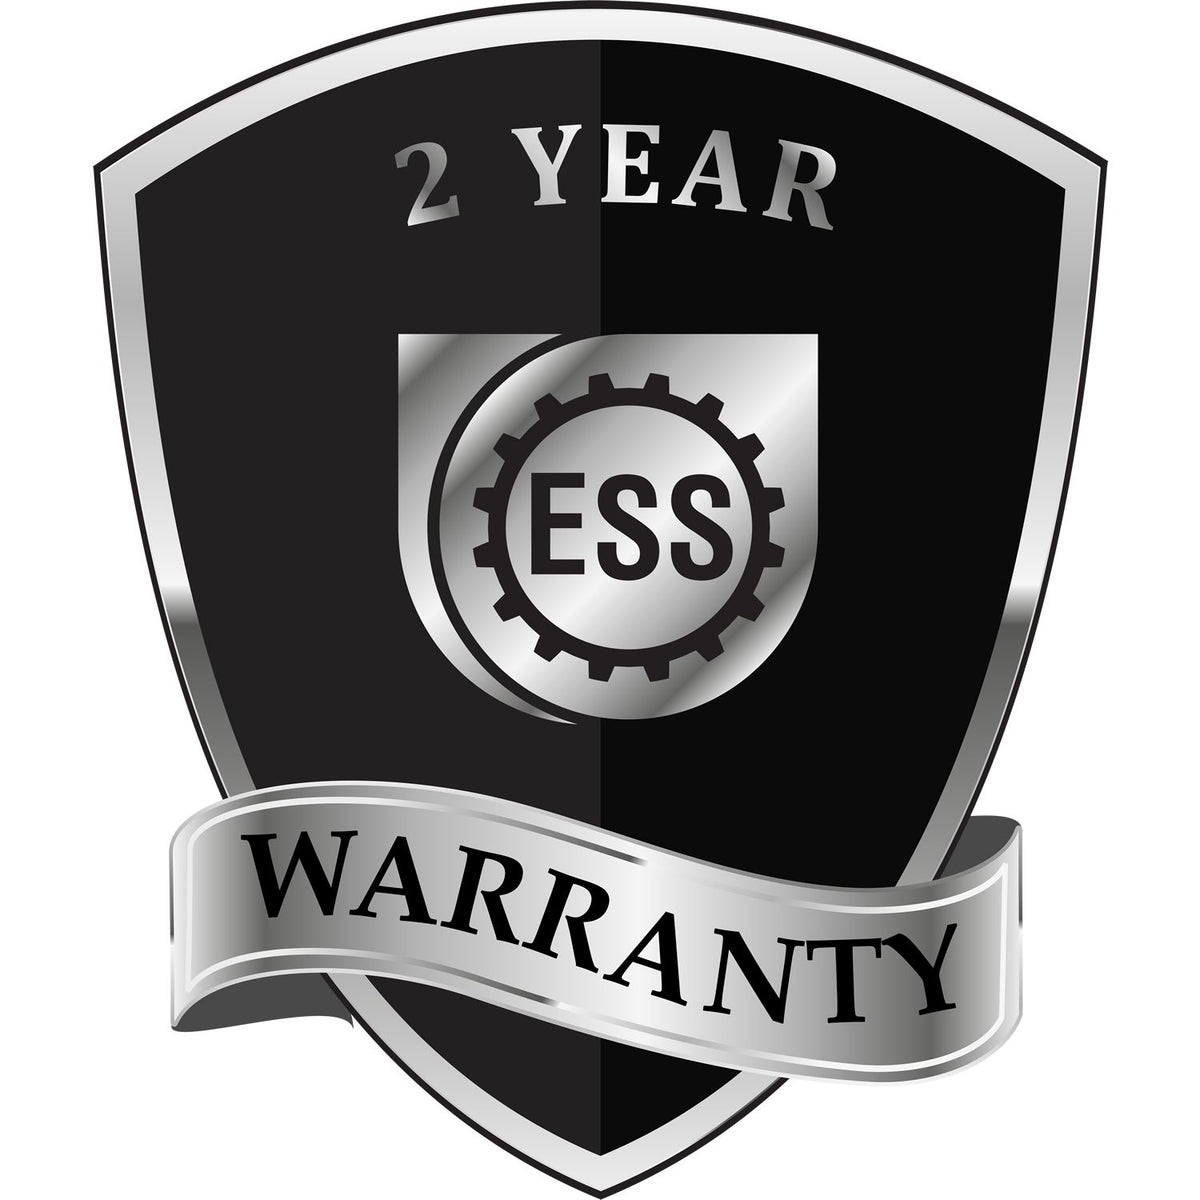 A black and silver badge or emblem showing warranty information for the Heavy Duty Cast Iron New Hampshire Geologist Seal Embosser